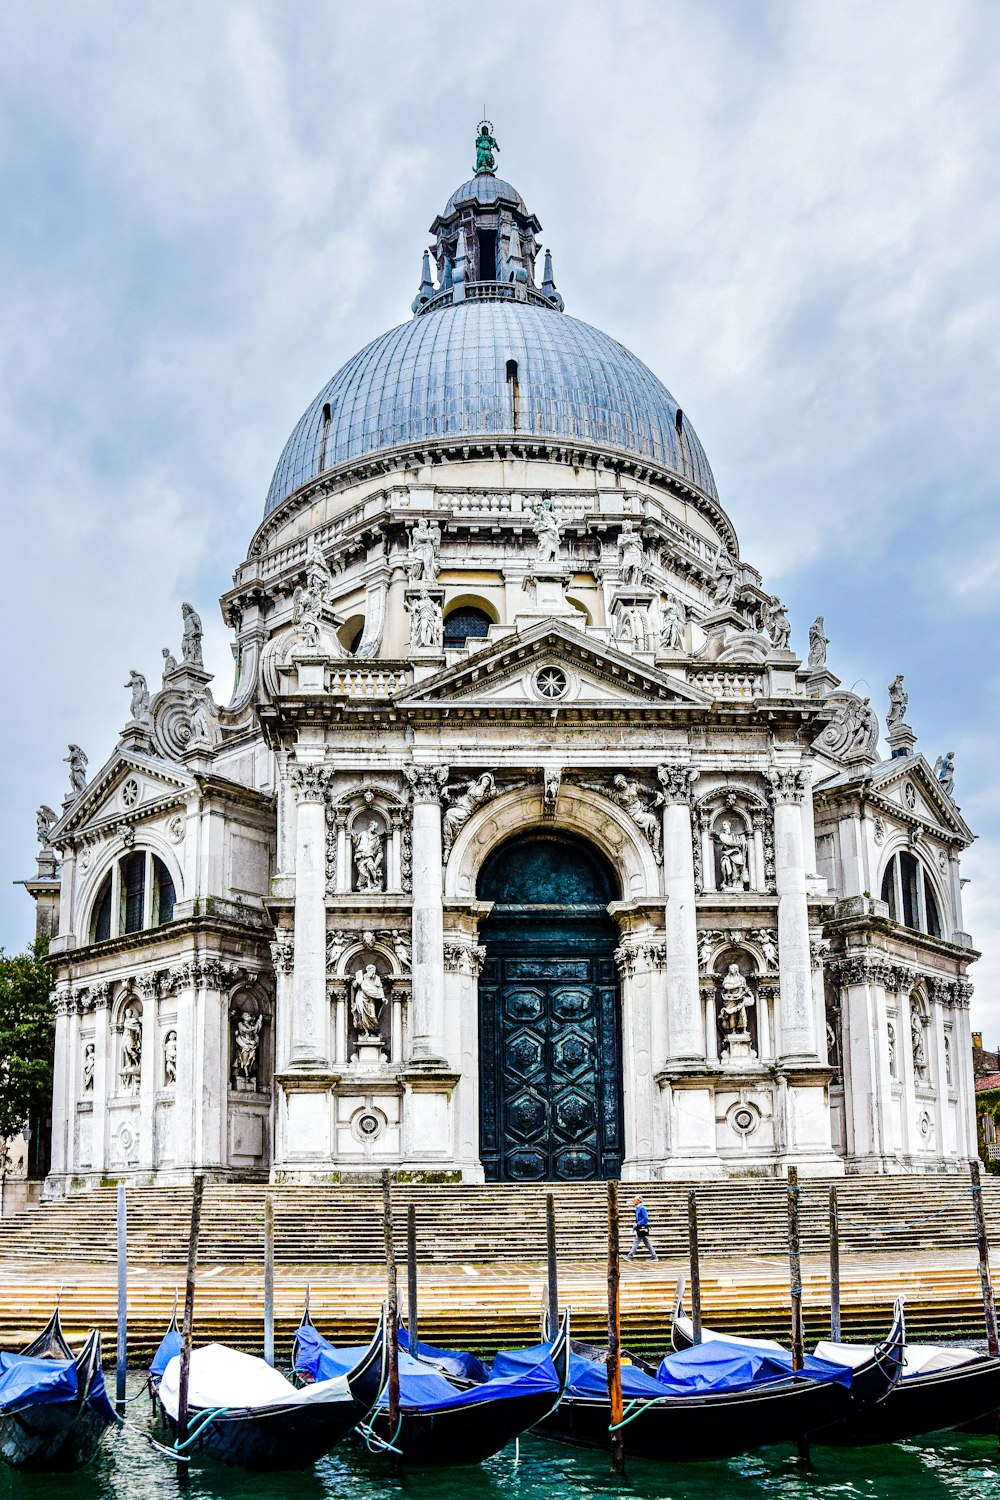 Santa Maria della Salute with a dome and boats in front of it